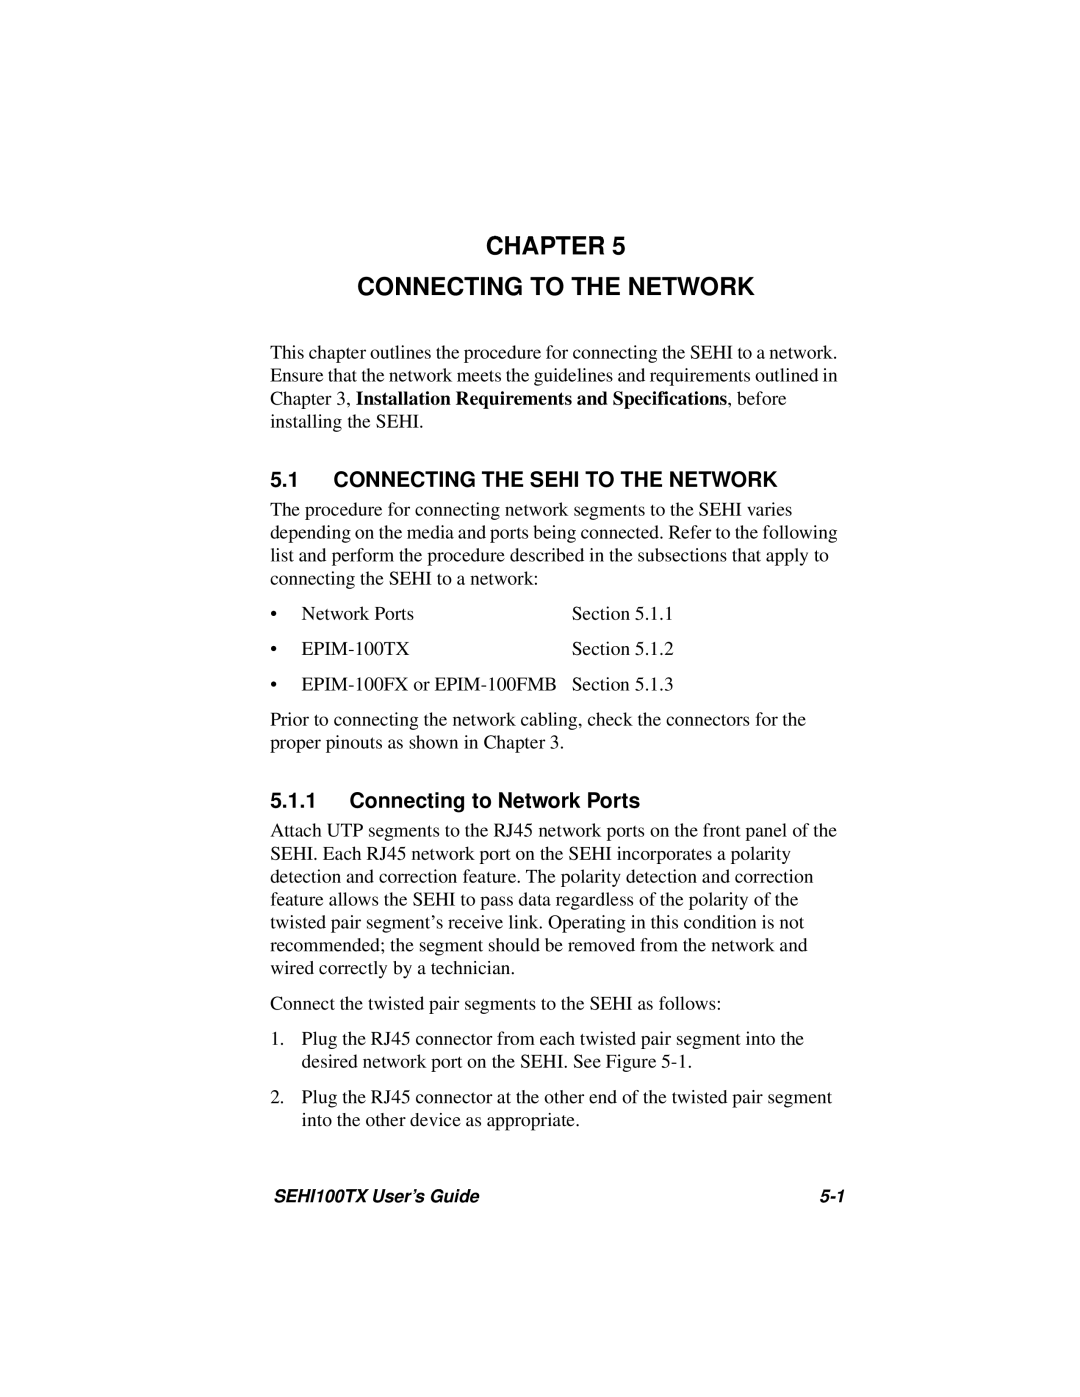 Cabletron Systems SEHI100TX-22 manual Chapter Connecting To The Network, Connecting The Sehi To The Network 